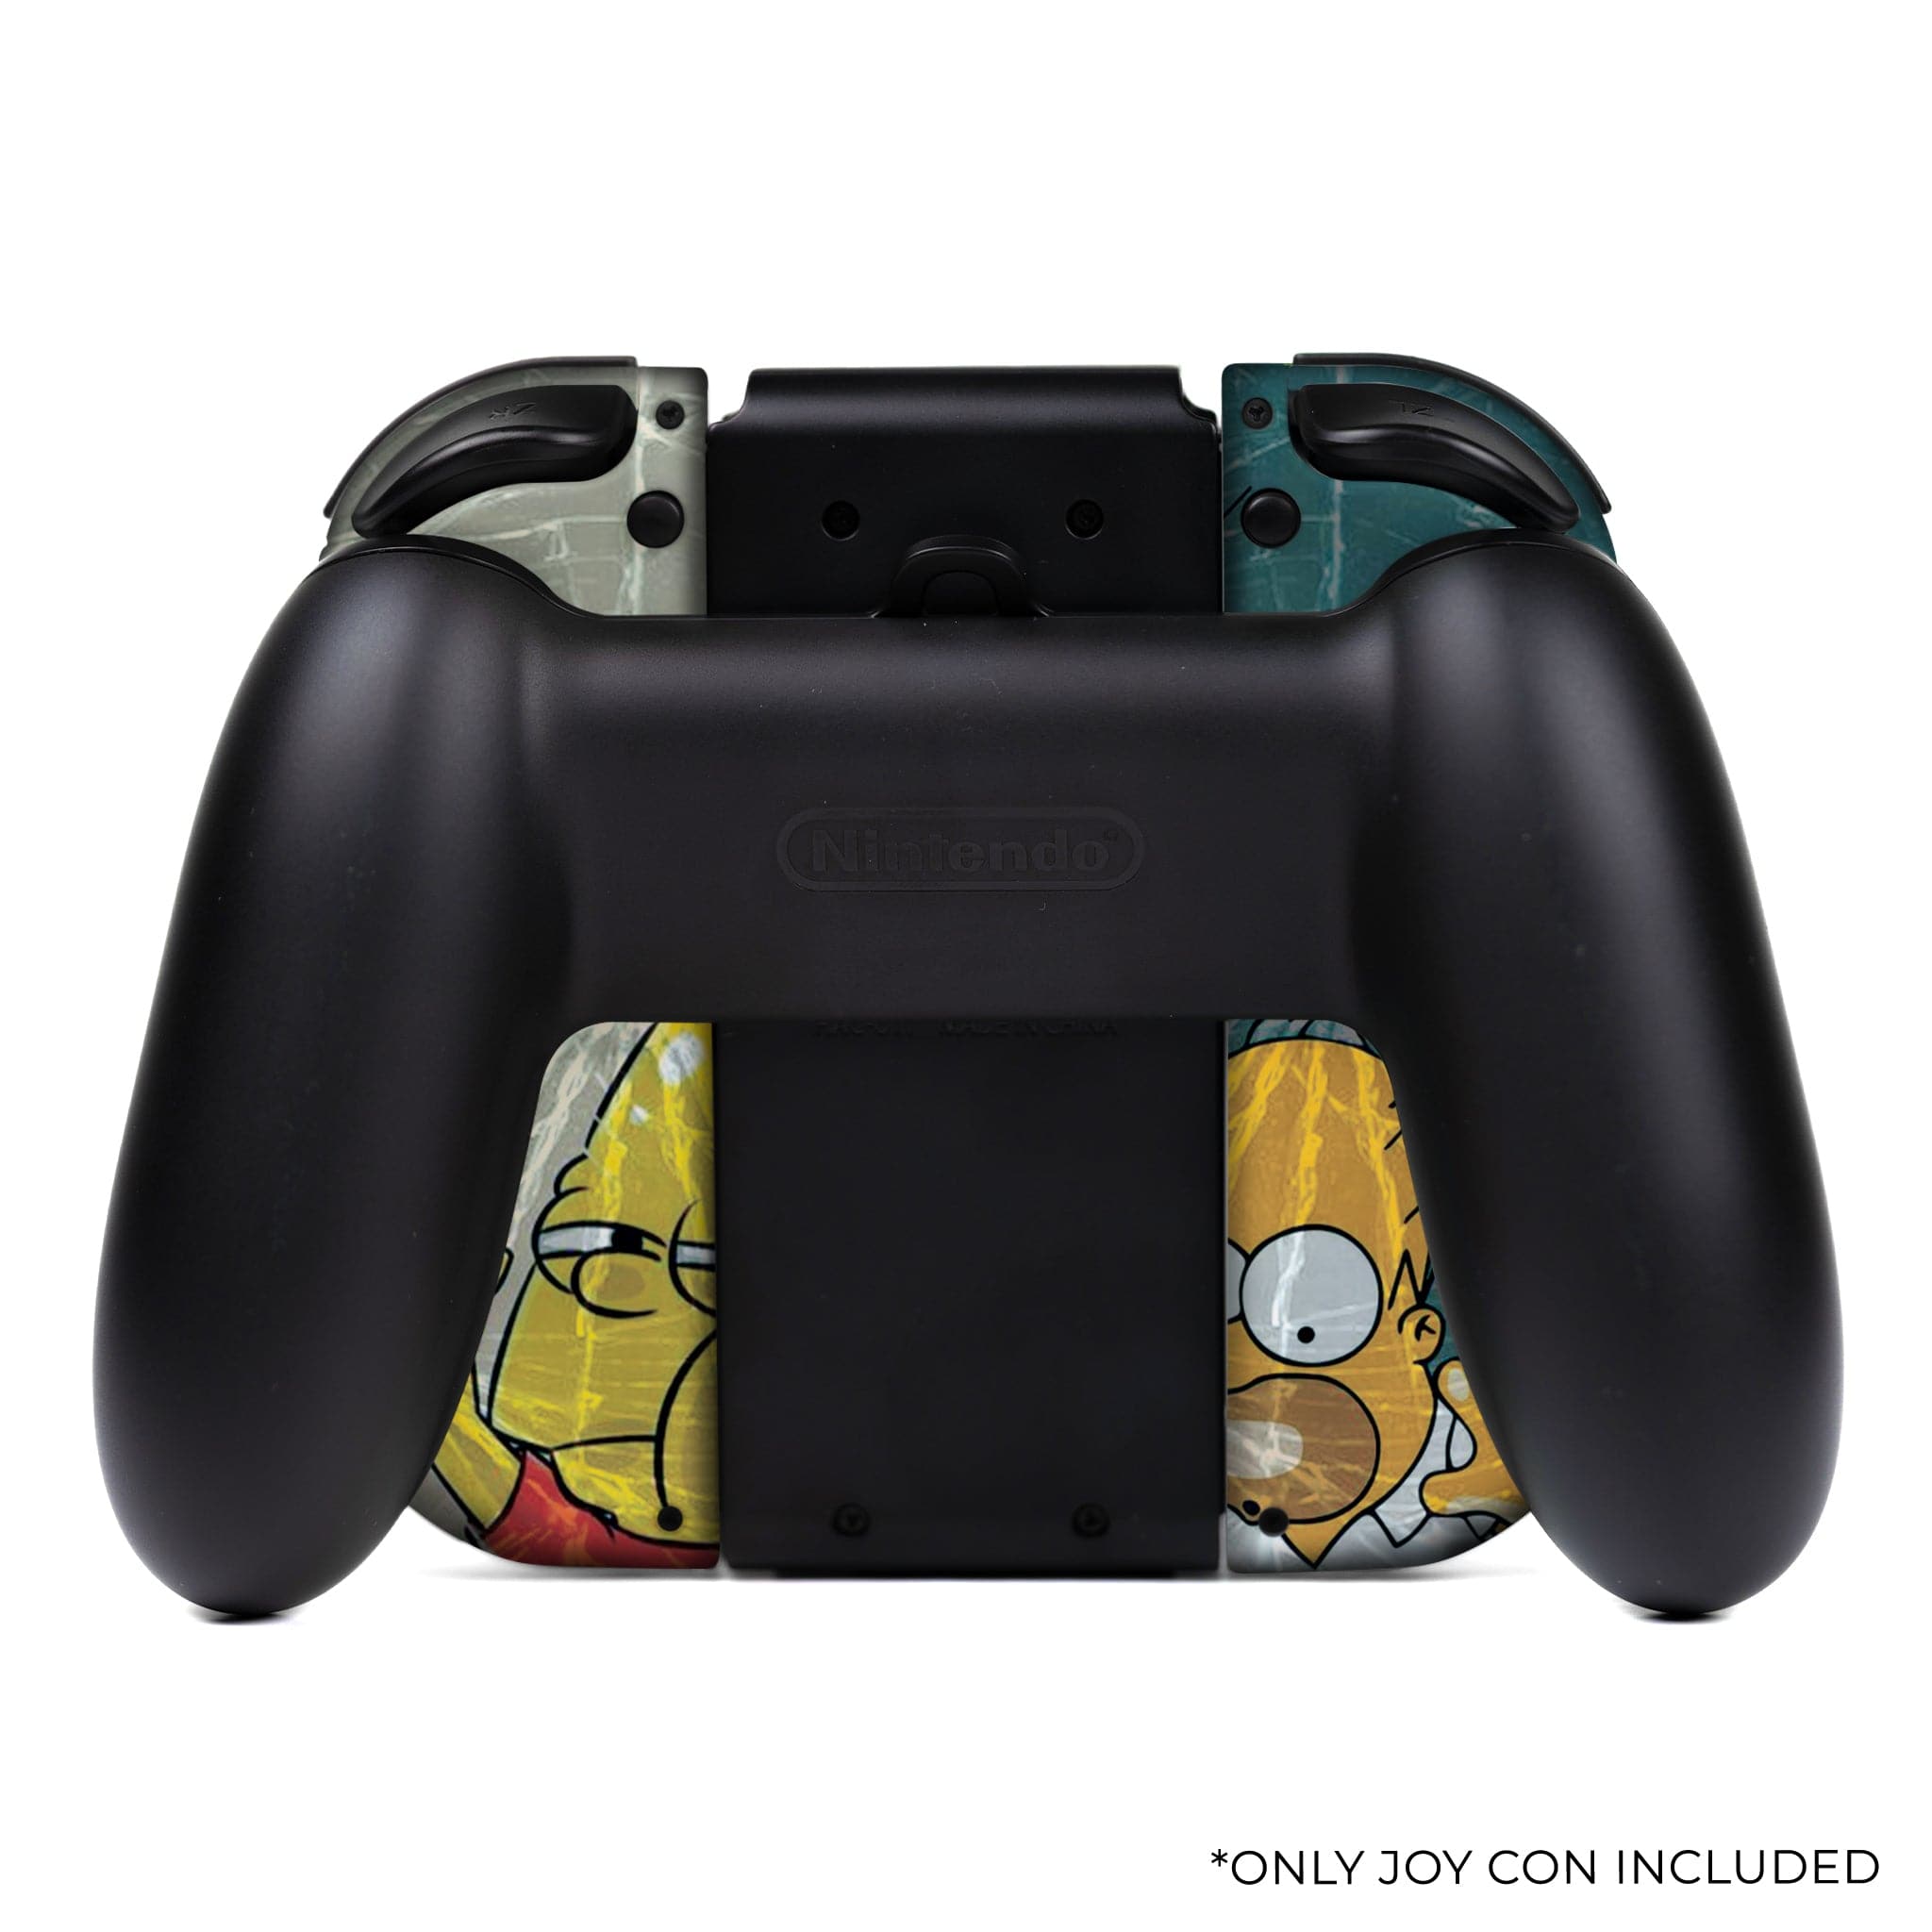 The Simpsons Inspired Nintendo Switch Joy-Con Left and Right Switch Controllers by Nintendo